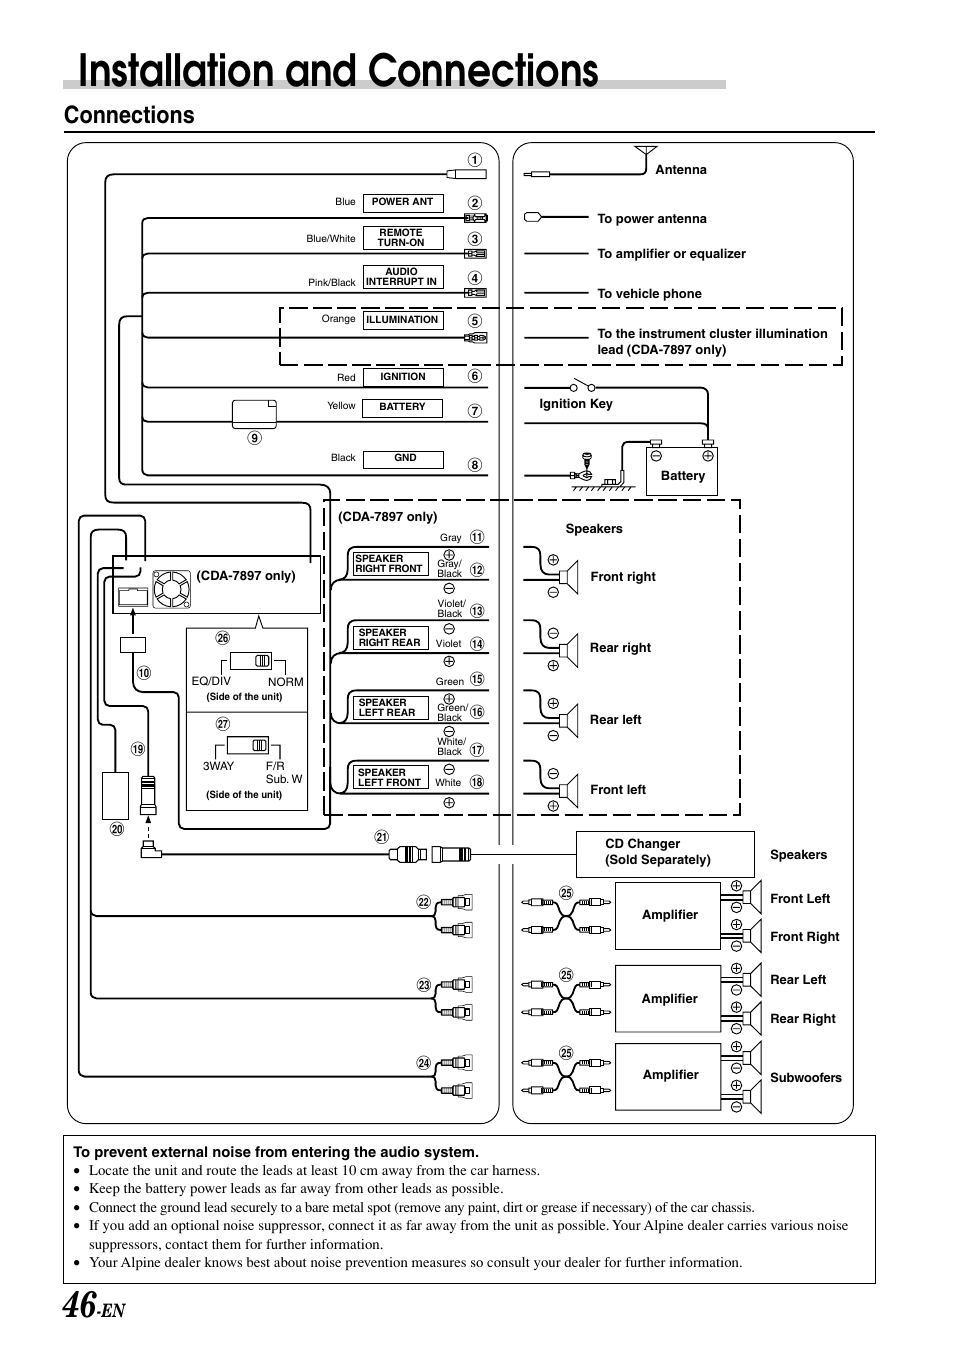 Installation connections, Connections | Alpine CDA-7897 User Manual | Page 48 / | mode